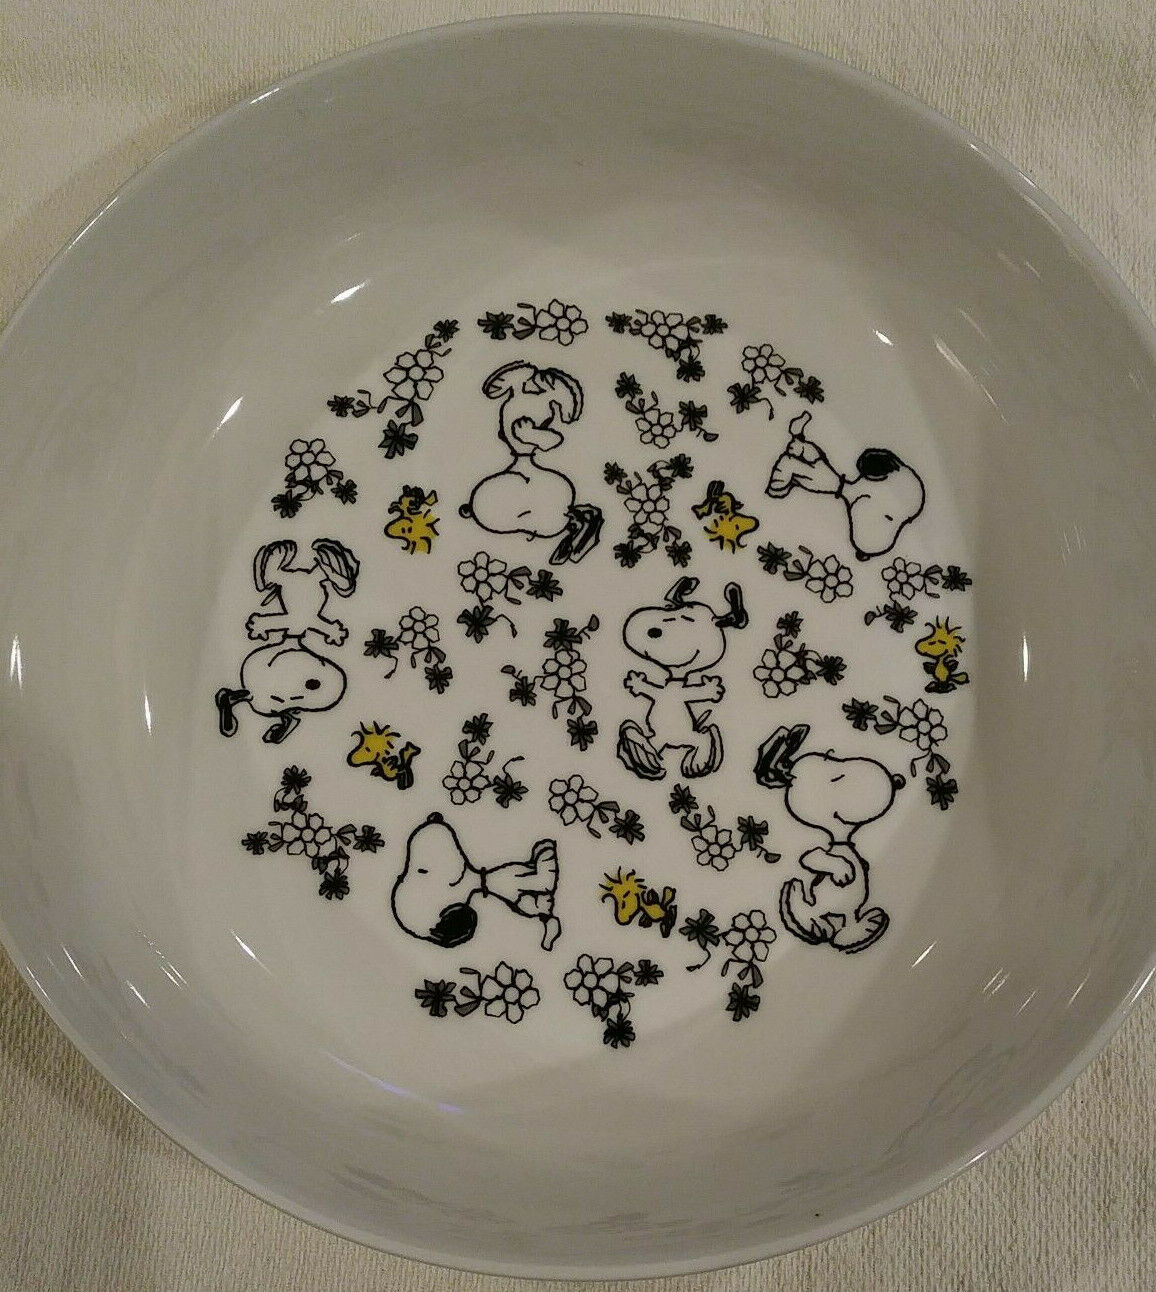 PEANUTS SNOOPY WOODSTOCK SERVING DINNER BOWL Collectible 8.5\